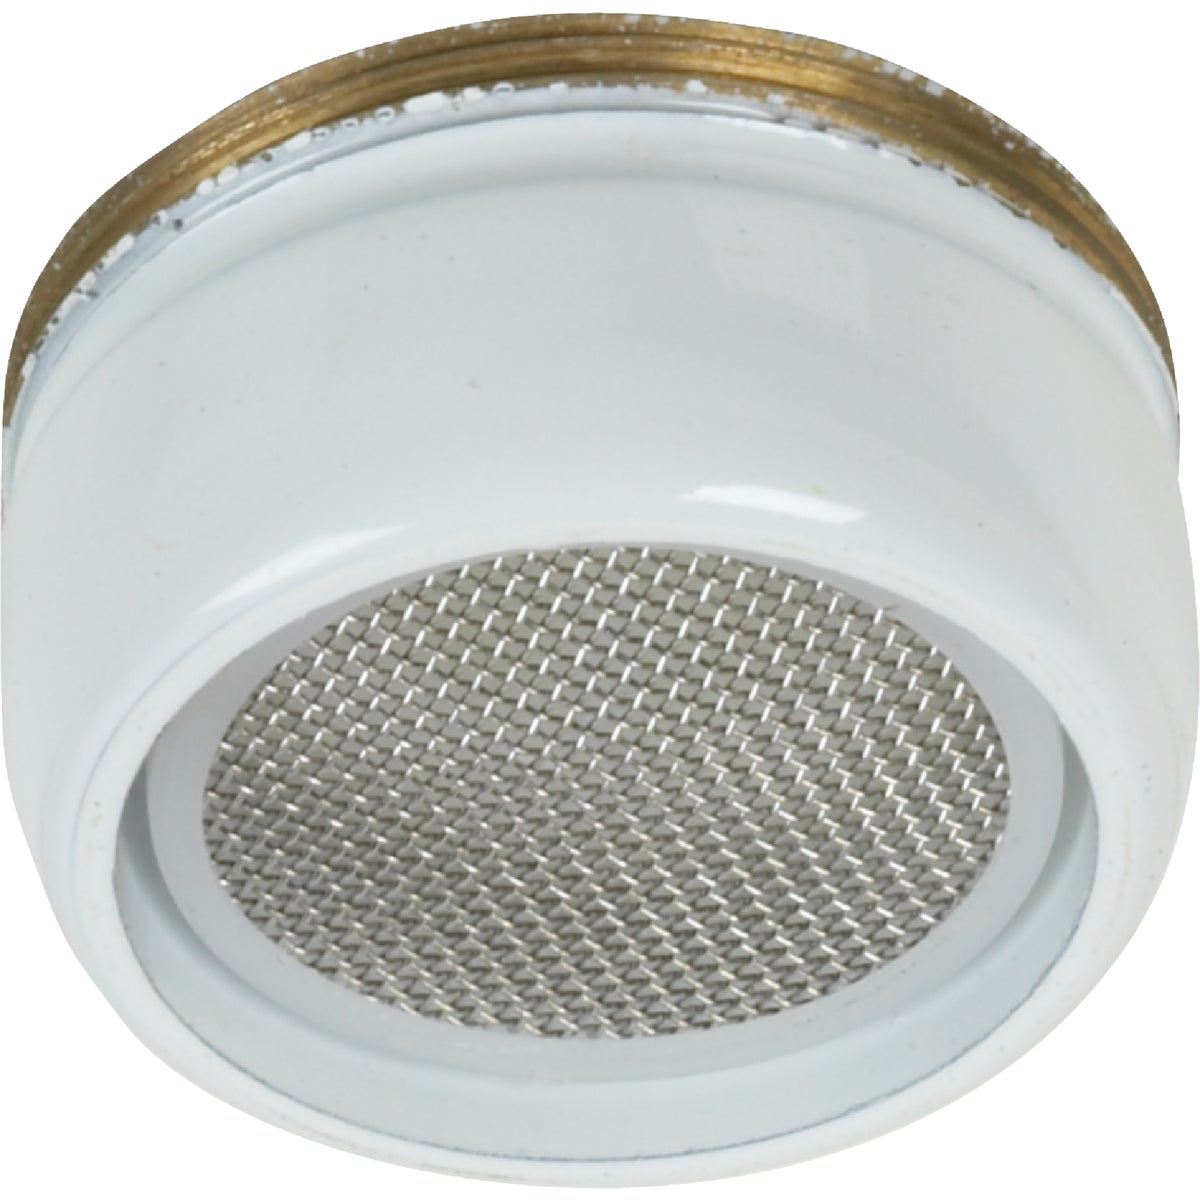 Item 408468, Fits kitchen and lavatory faucets with 15/16" diameter Female threads. 2.